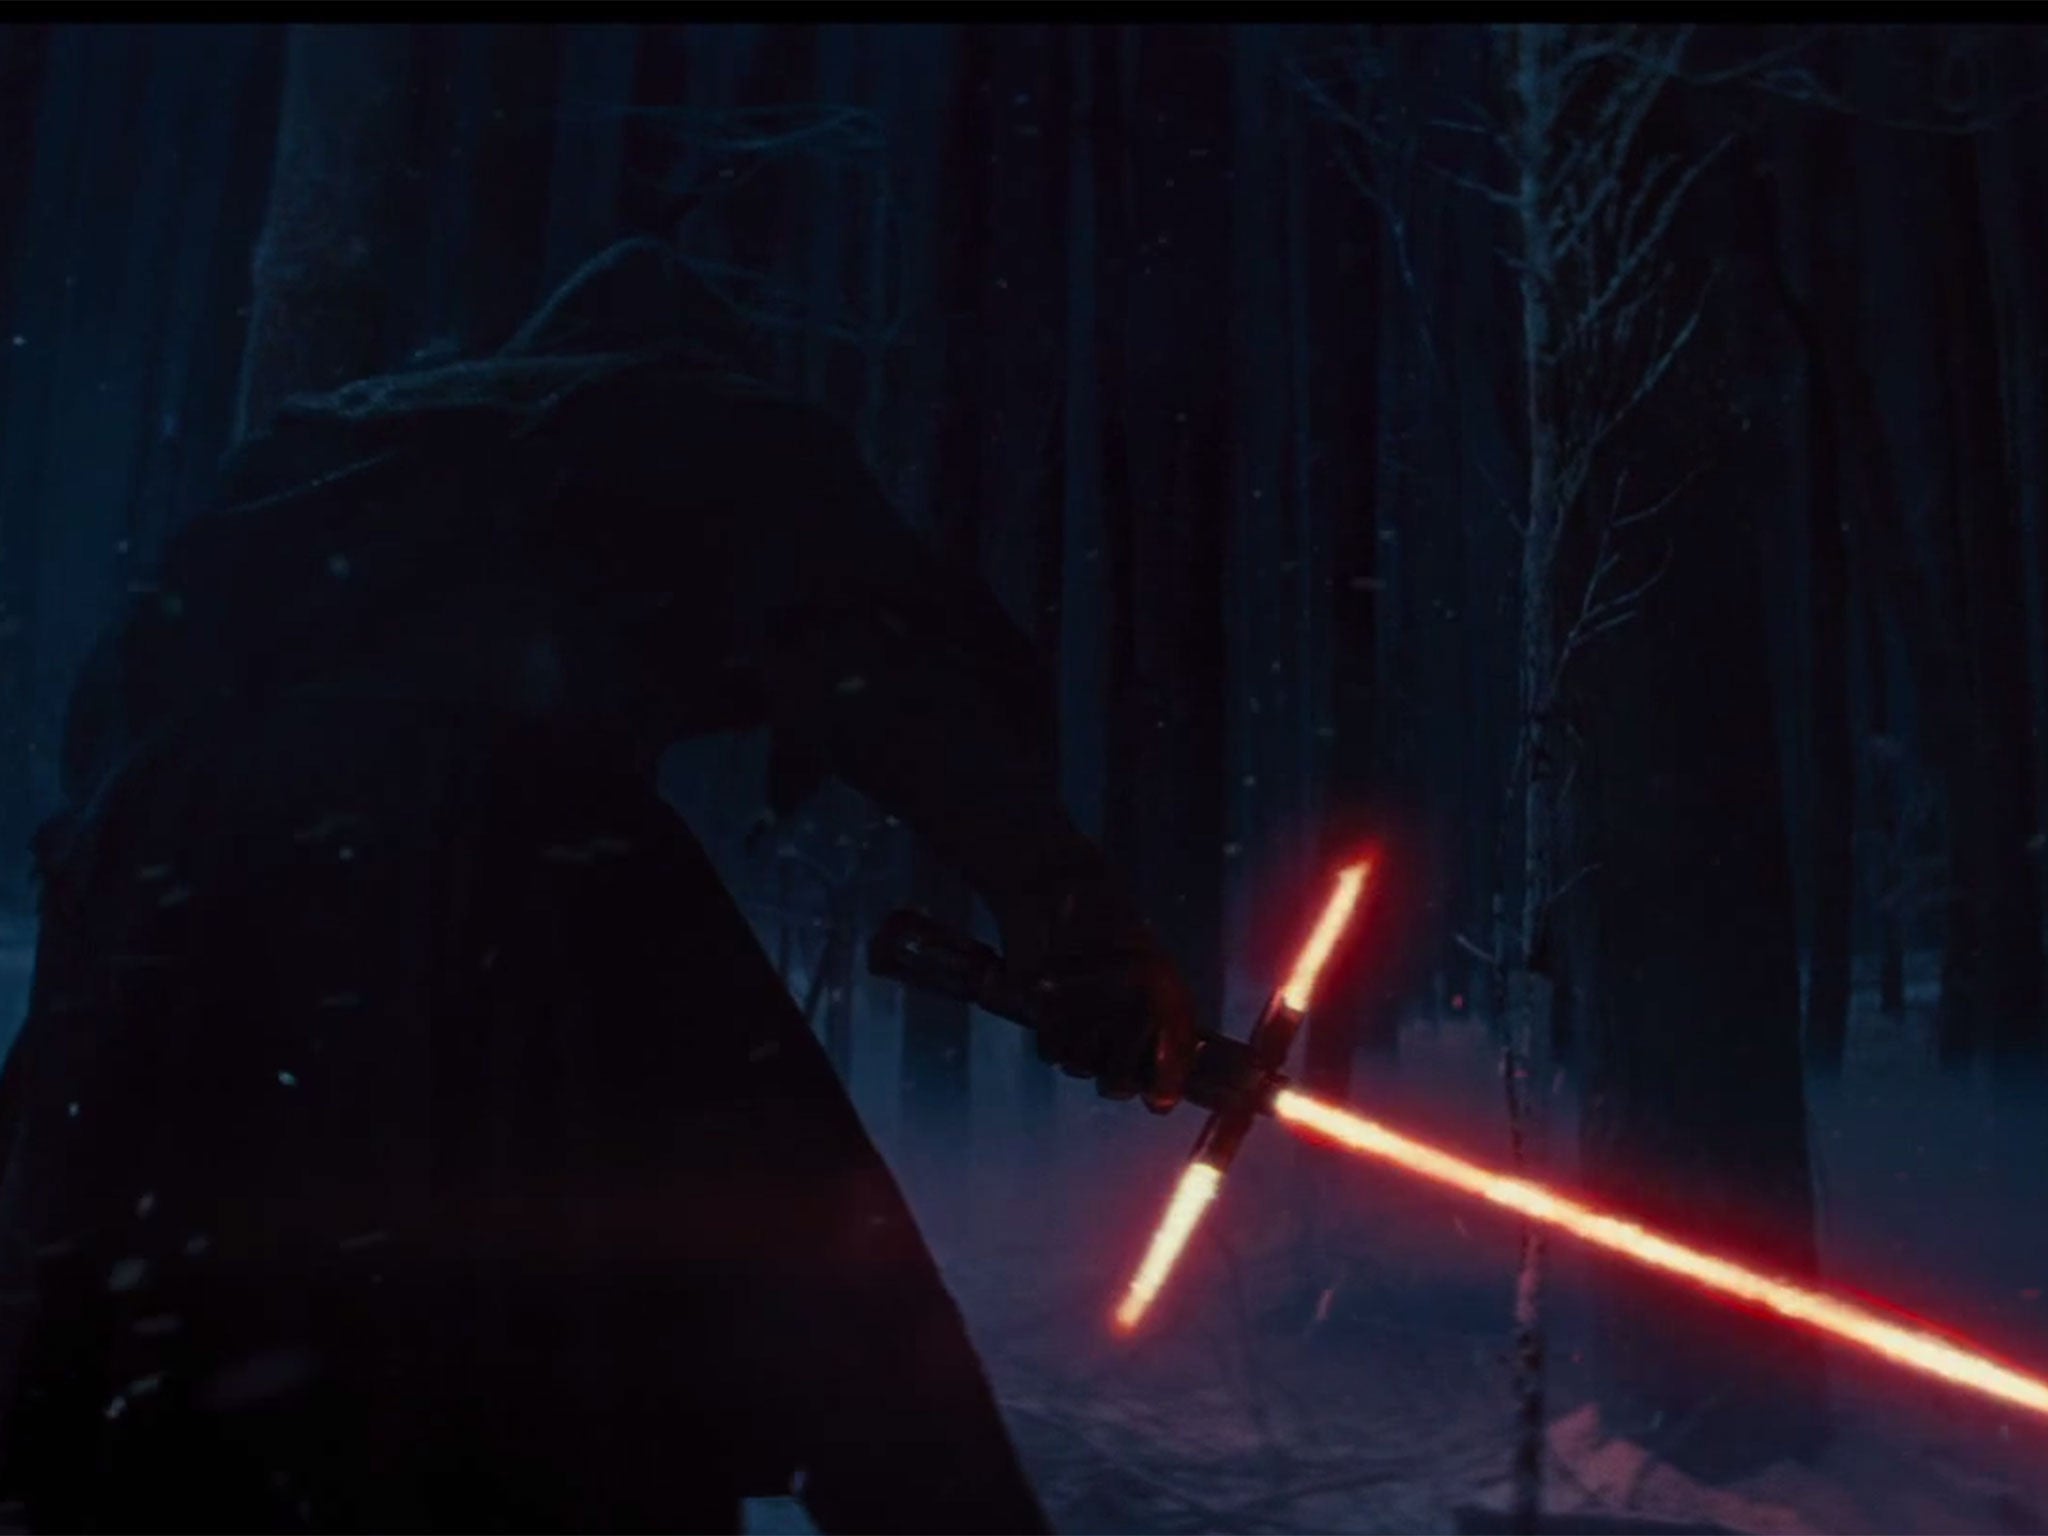 The new light saber in Star Wars: The Force Awakens